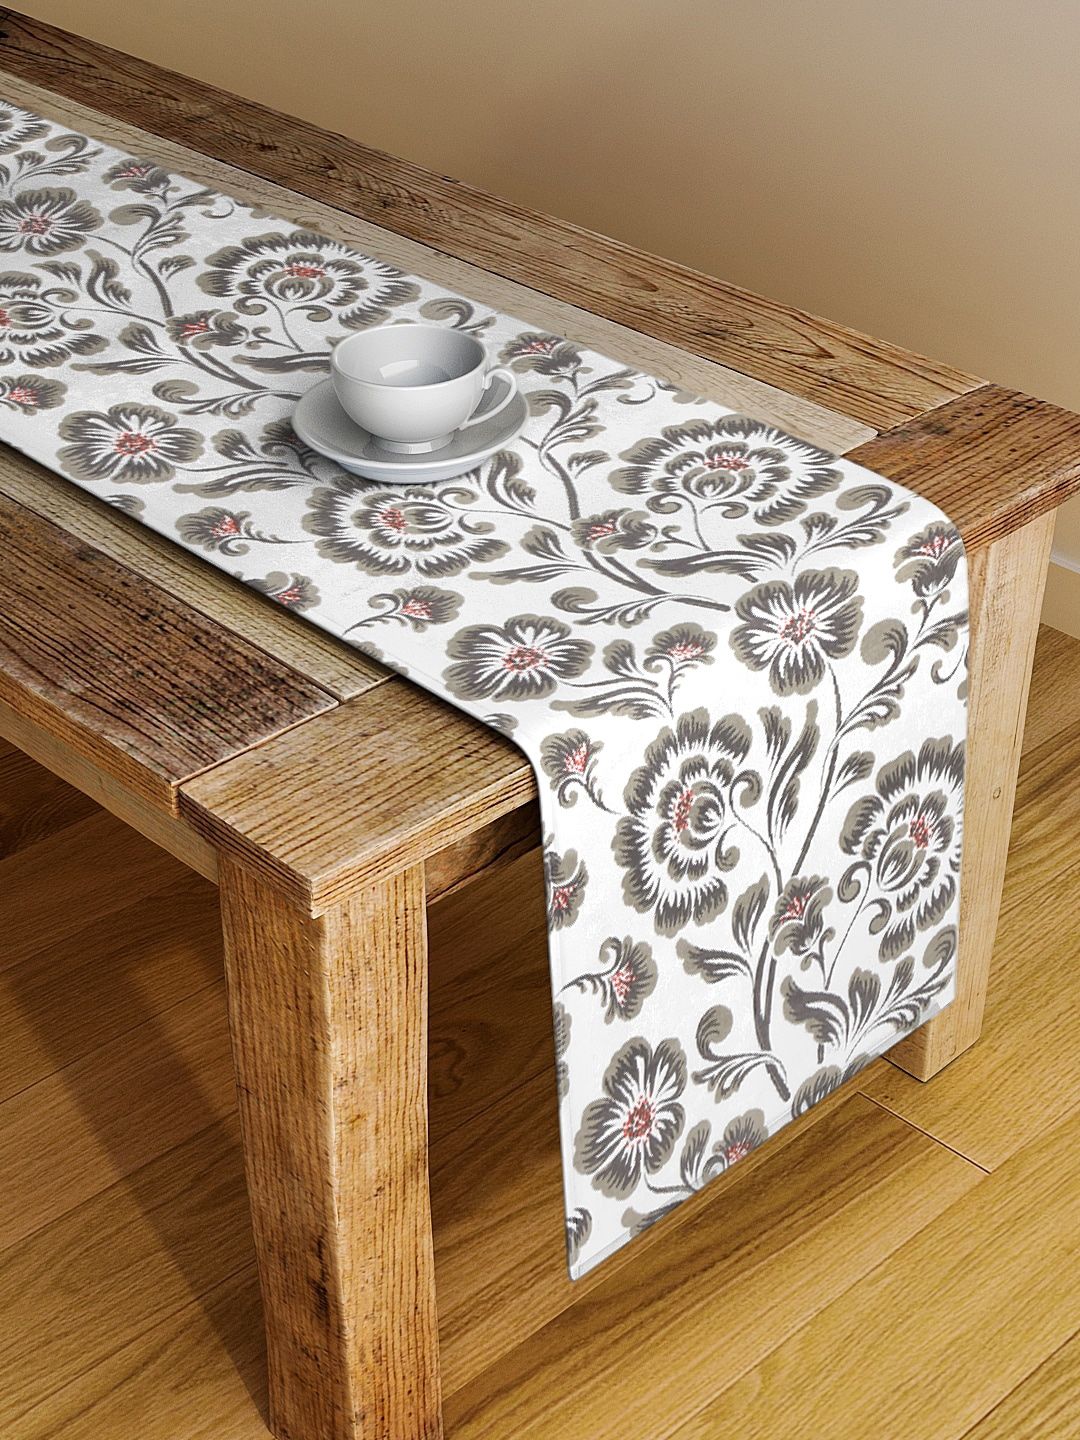 BLANC9 Grey & White Floral Printed Cotton Table Runner Price in India